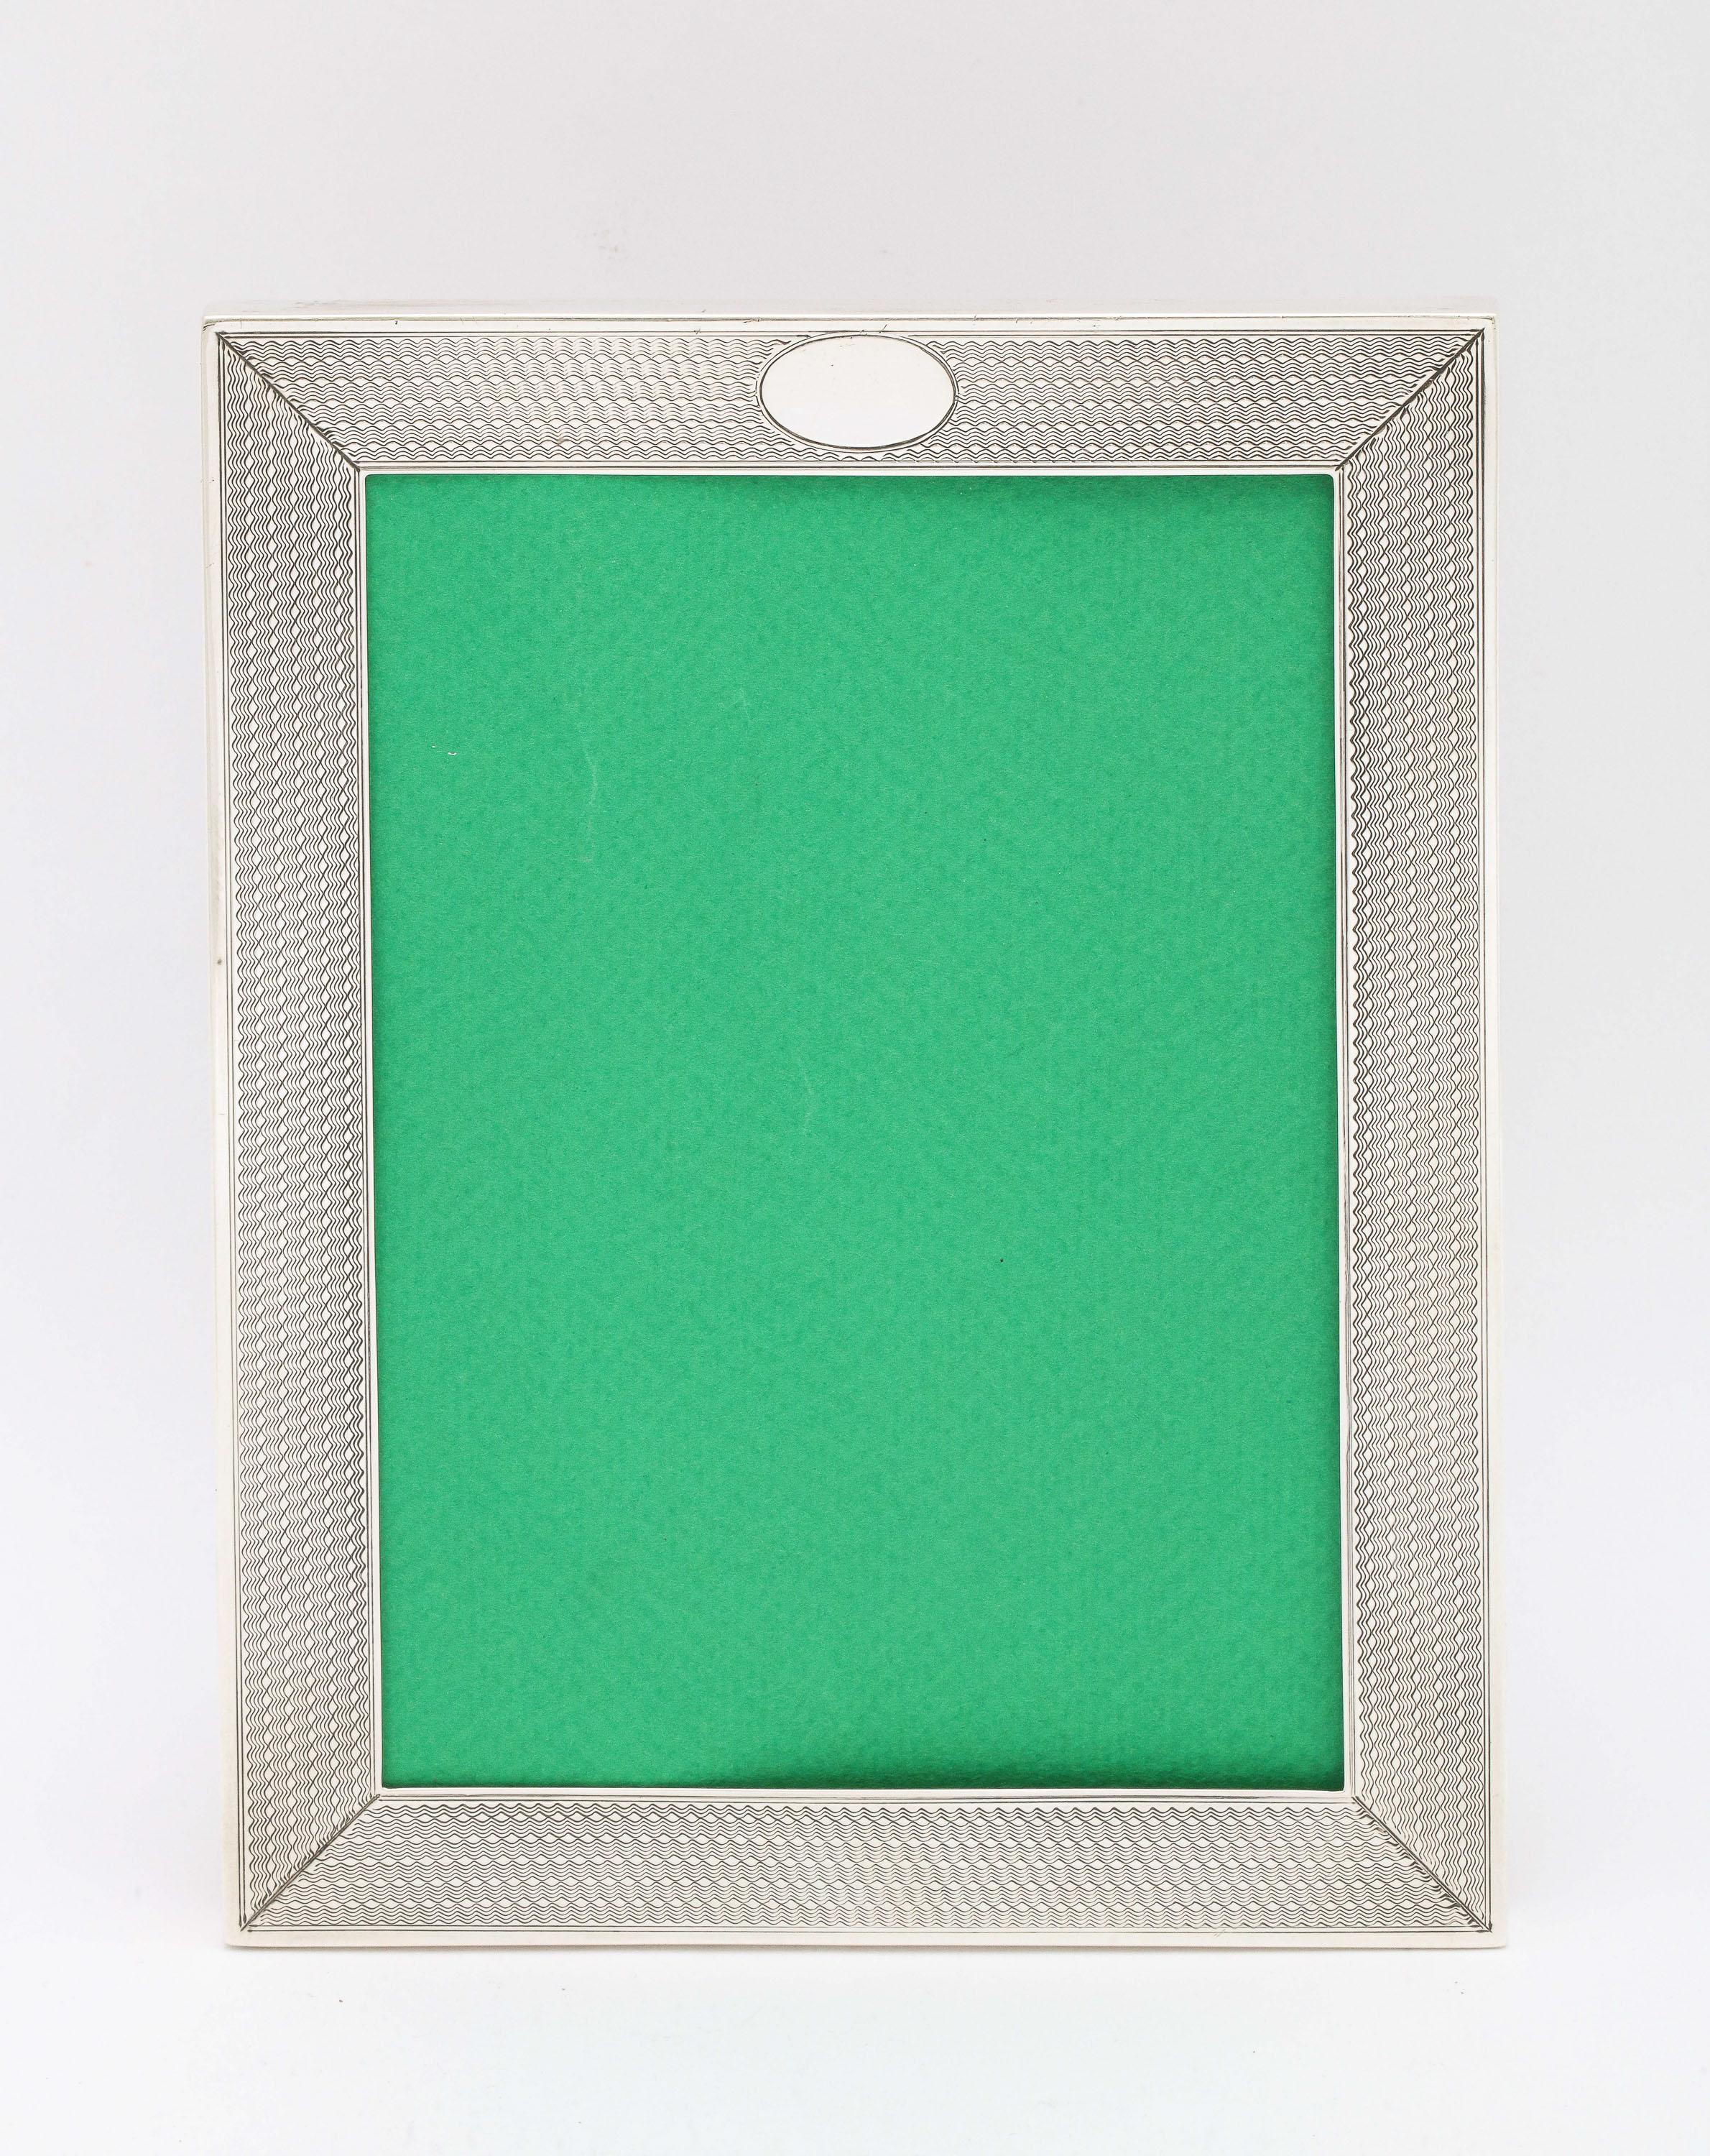 Edwardian, sterling silver picture frame with velvet back, Birmingham, England, year-hallmarked for 1910, L. Emmanuel - maker. Engine-turned design. Vacant cartouche. Outer frame measures 5 inches by just under 6 3/4 inches wide x 4 inches deep when